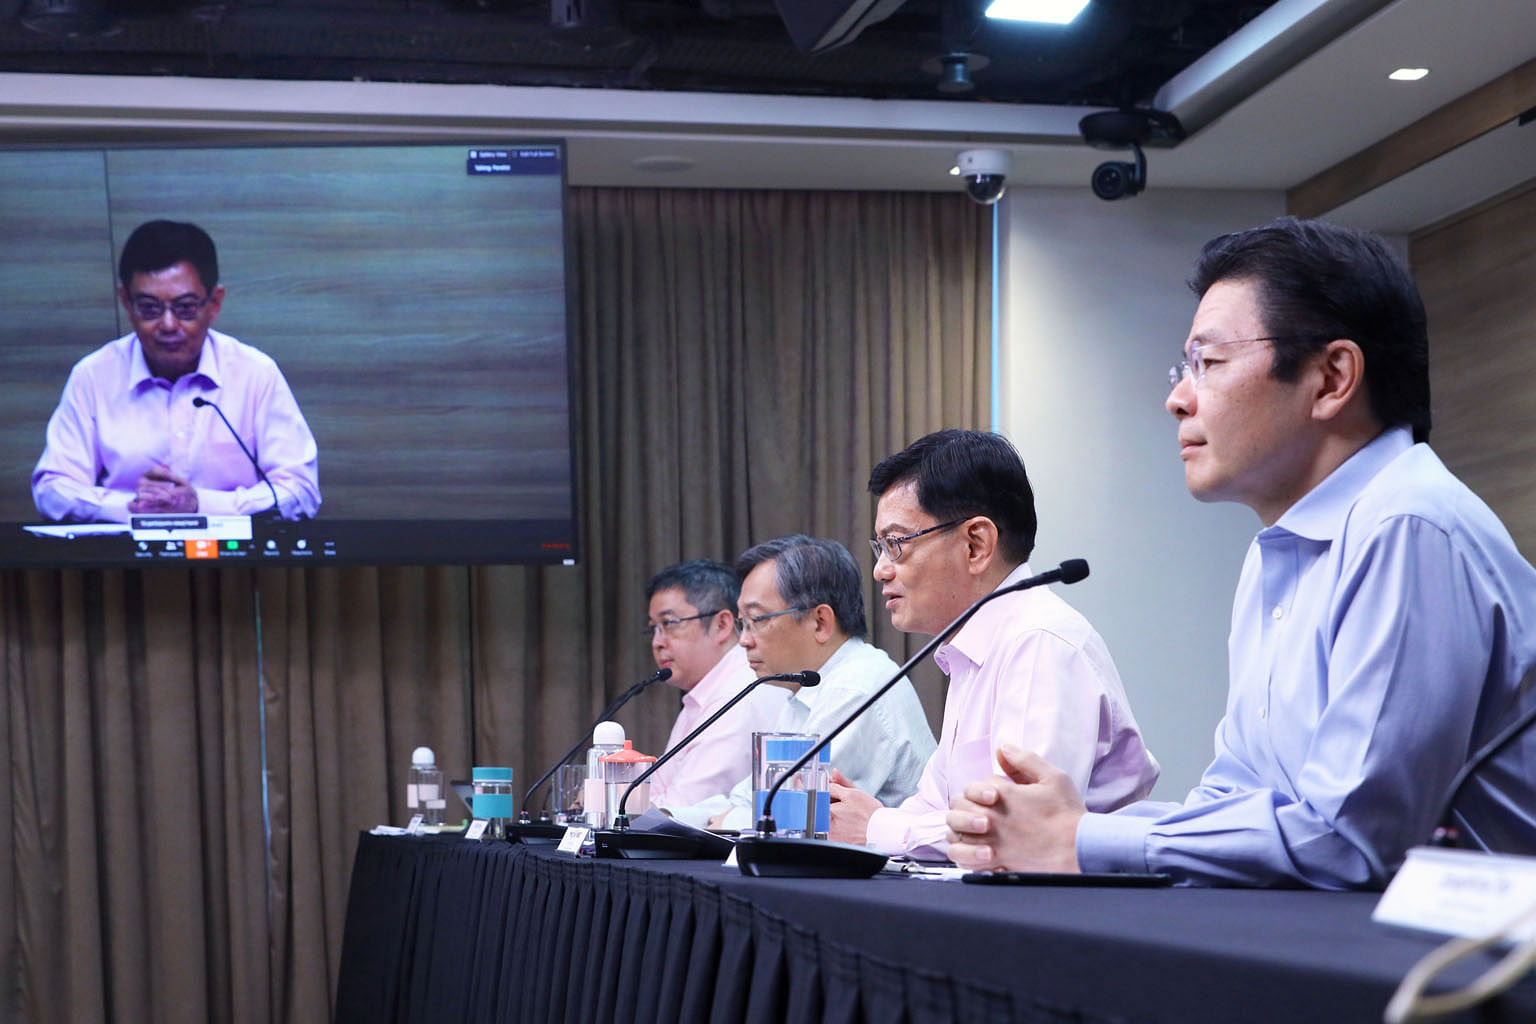 Below: Workers at S11 Dormitory. A fourth wave emerged around March 30 when foreign workers started coming down with the virus. Right: Deputy Prime Minister Heng Swee Keat joining a virtual press conference by the multi-ministry task force on April 2